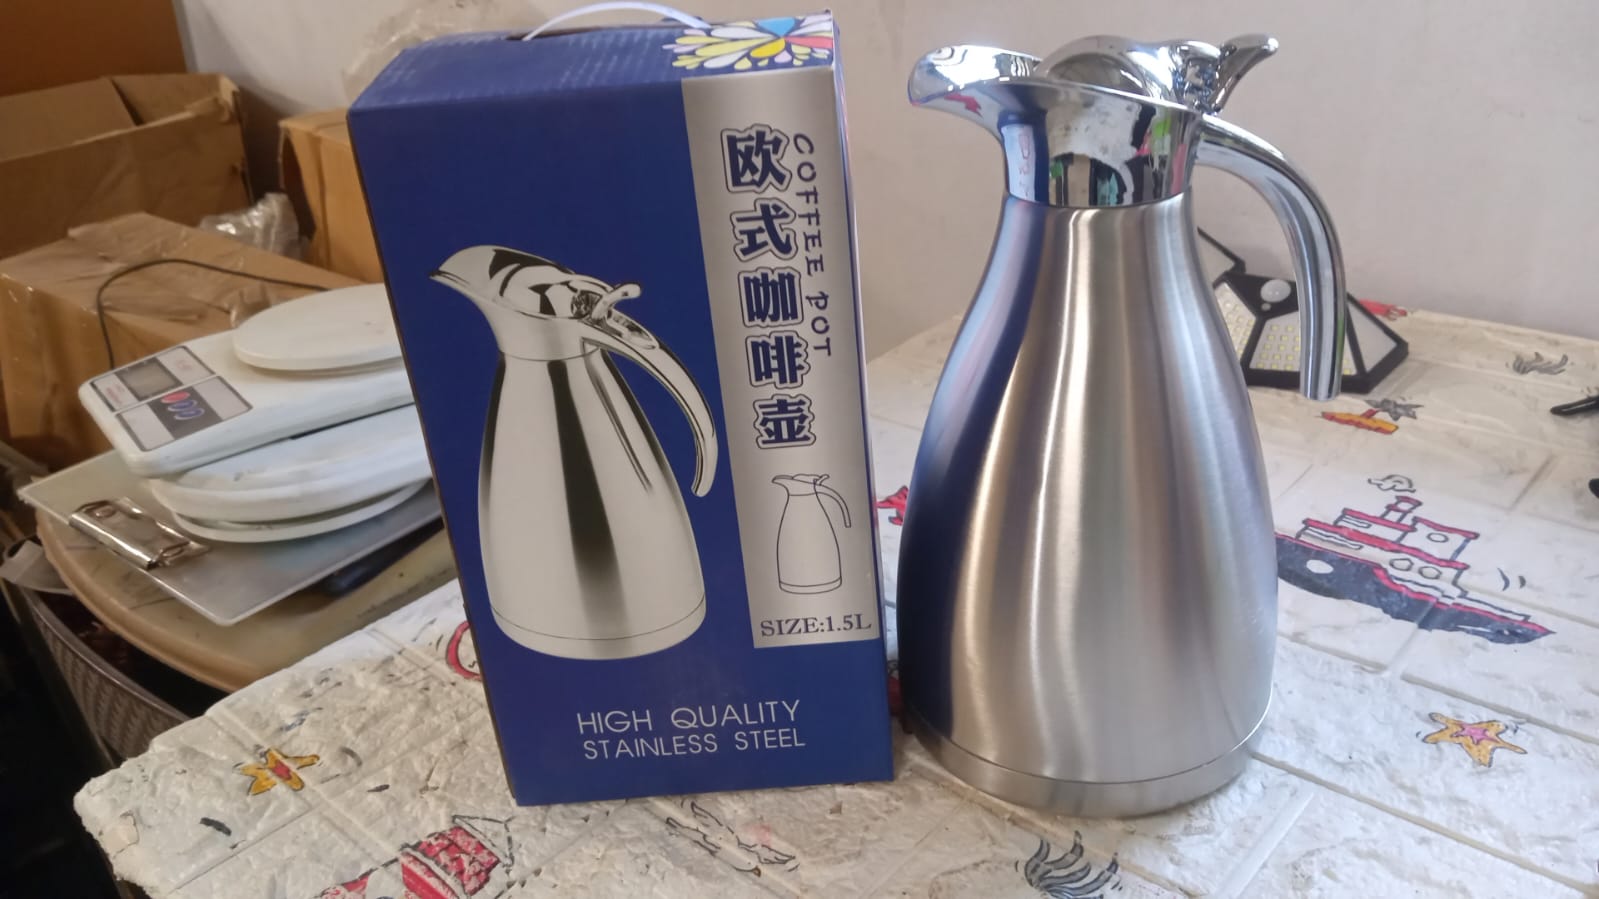 Vacuum Insulated Kettle Jug, Vacuum Insulated Thermo Kettle Jug Insulated Vacuum Flask, Vacuum Kettle Jug Stainless Steel For Milk ,Tea ,Beverage Home Office Travel Coffee (2.5 Ltr , 1.5 Ltr , 2 Ltr) (1Pc)